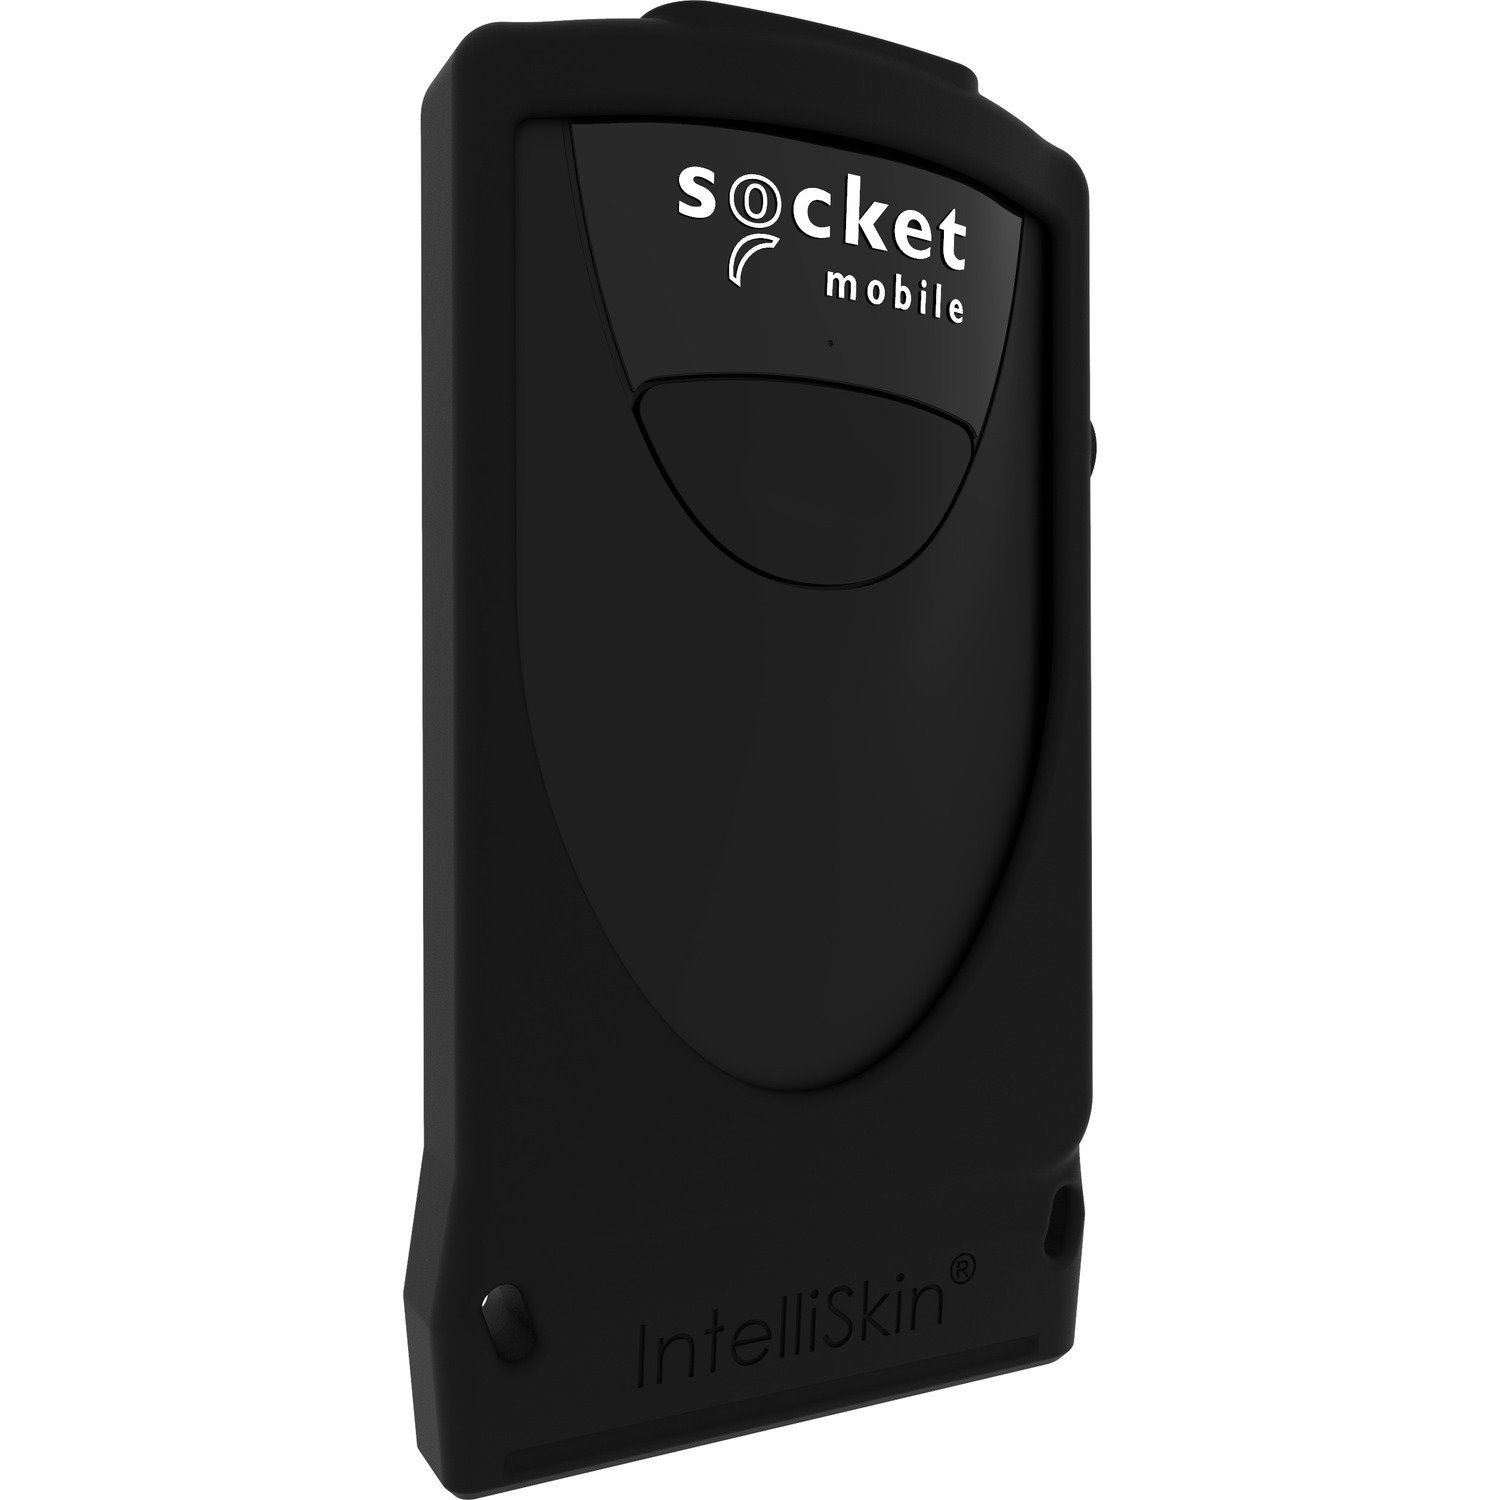 Socket Mobile DuraScan D840 Retail, Hospitality, Logistics, Healthcare, Inventory, Transportation, Warehouse, Field Sales/Service, Commercial Service, Smartphone Barcode Scanner - Wireless Connectivity